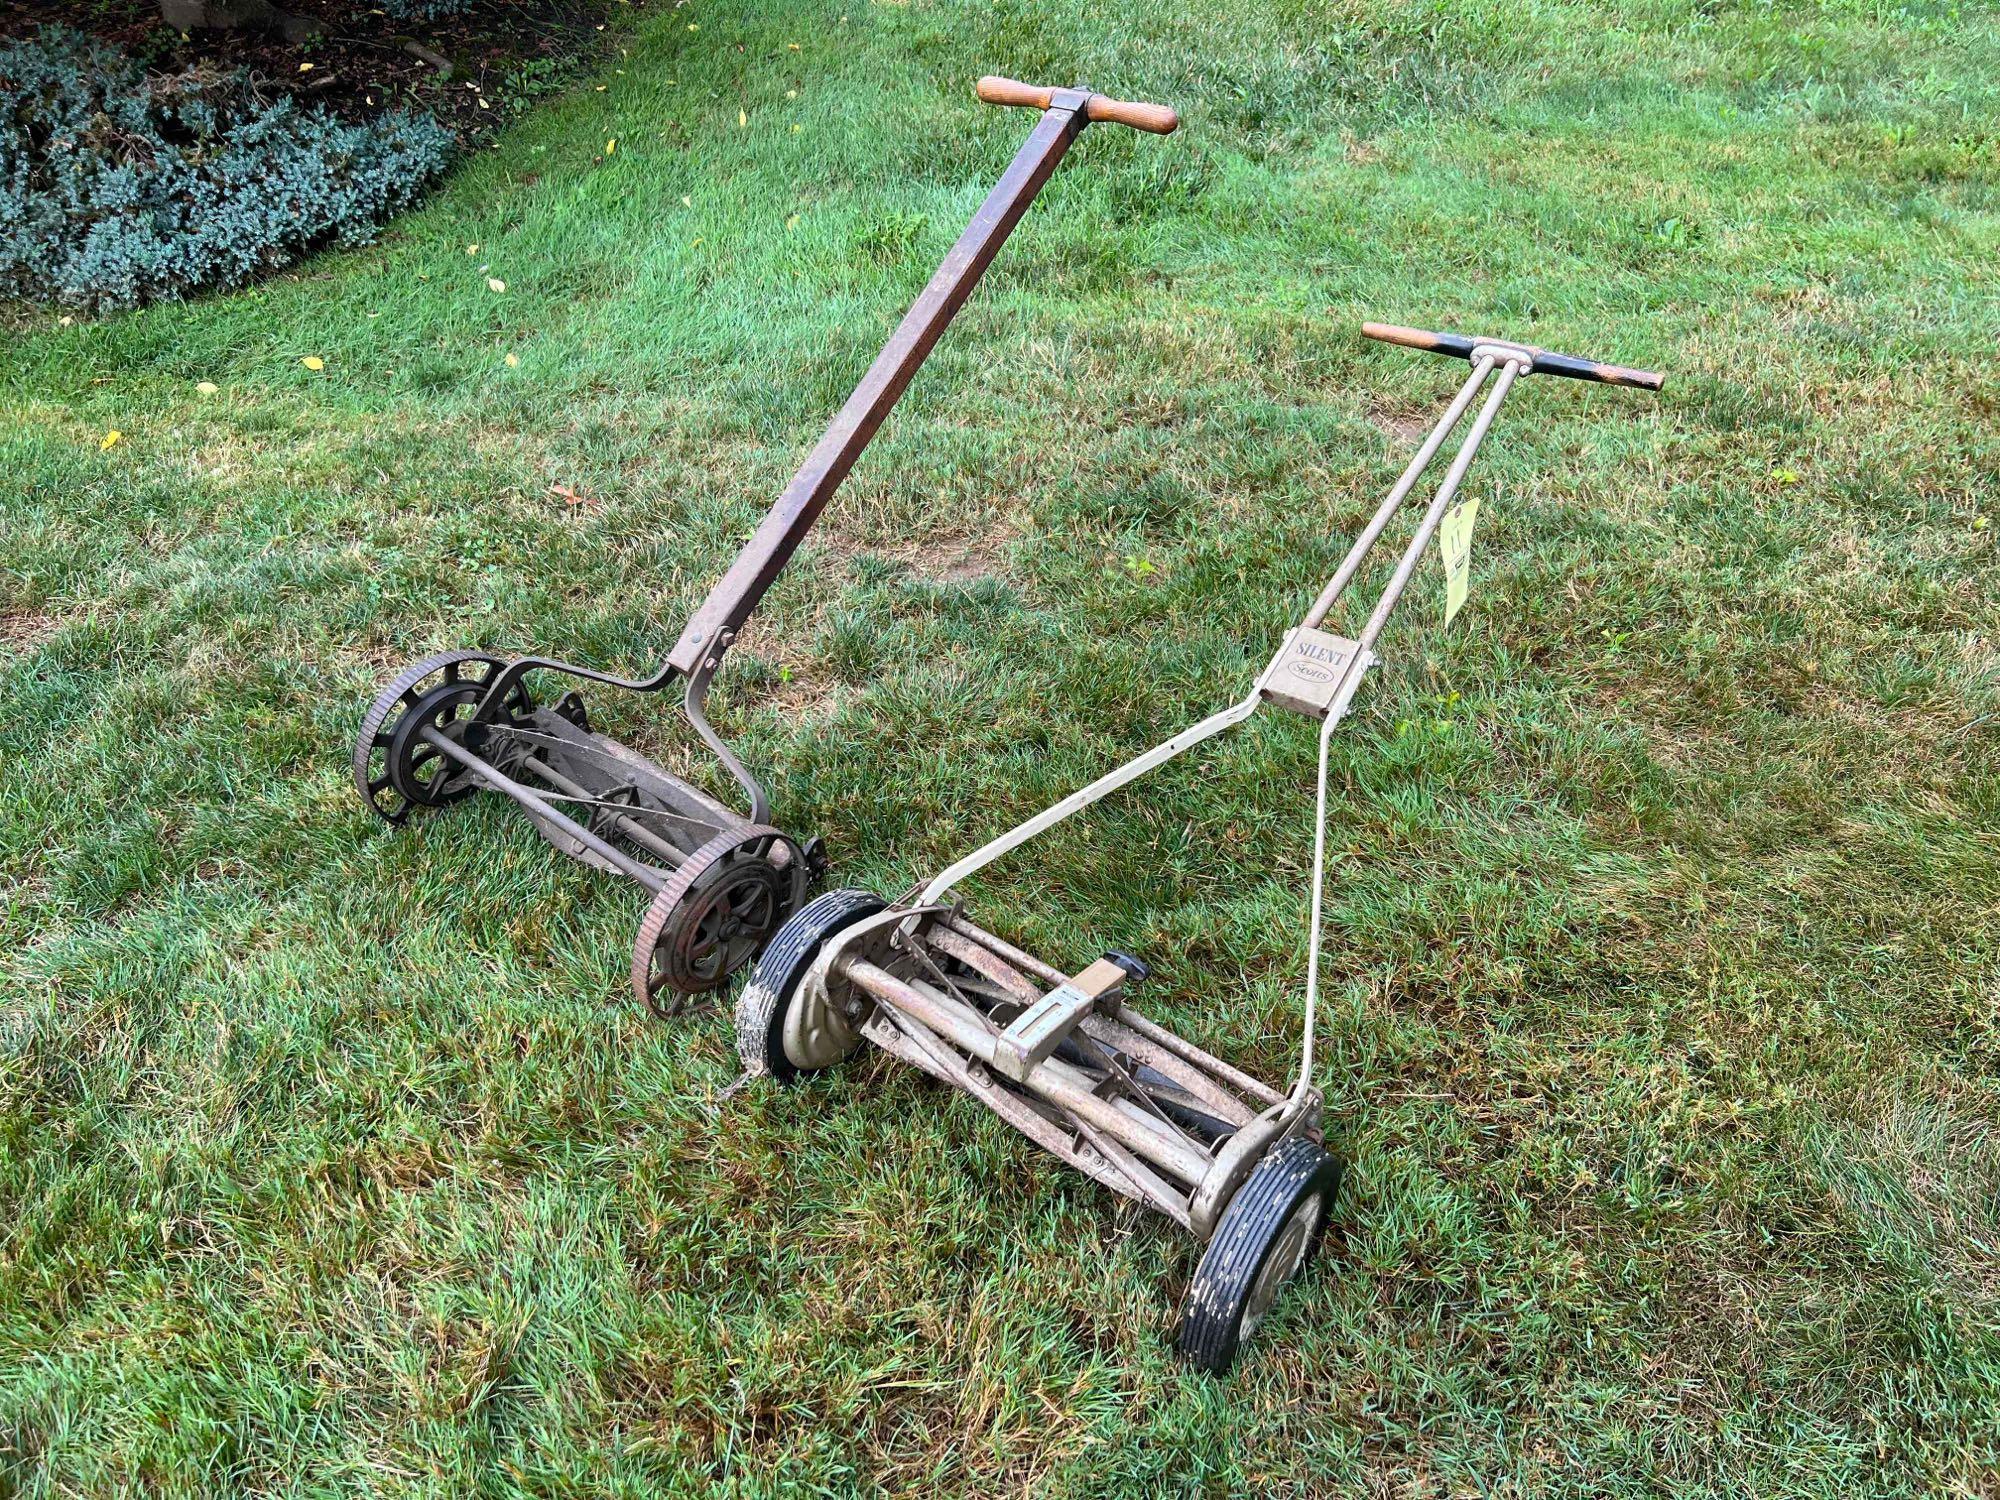 4 vintage reel mowers for yard and garden art - antiques - by